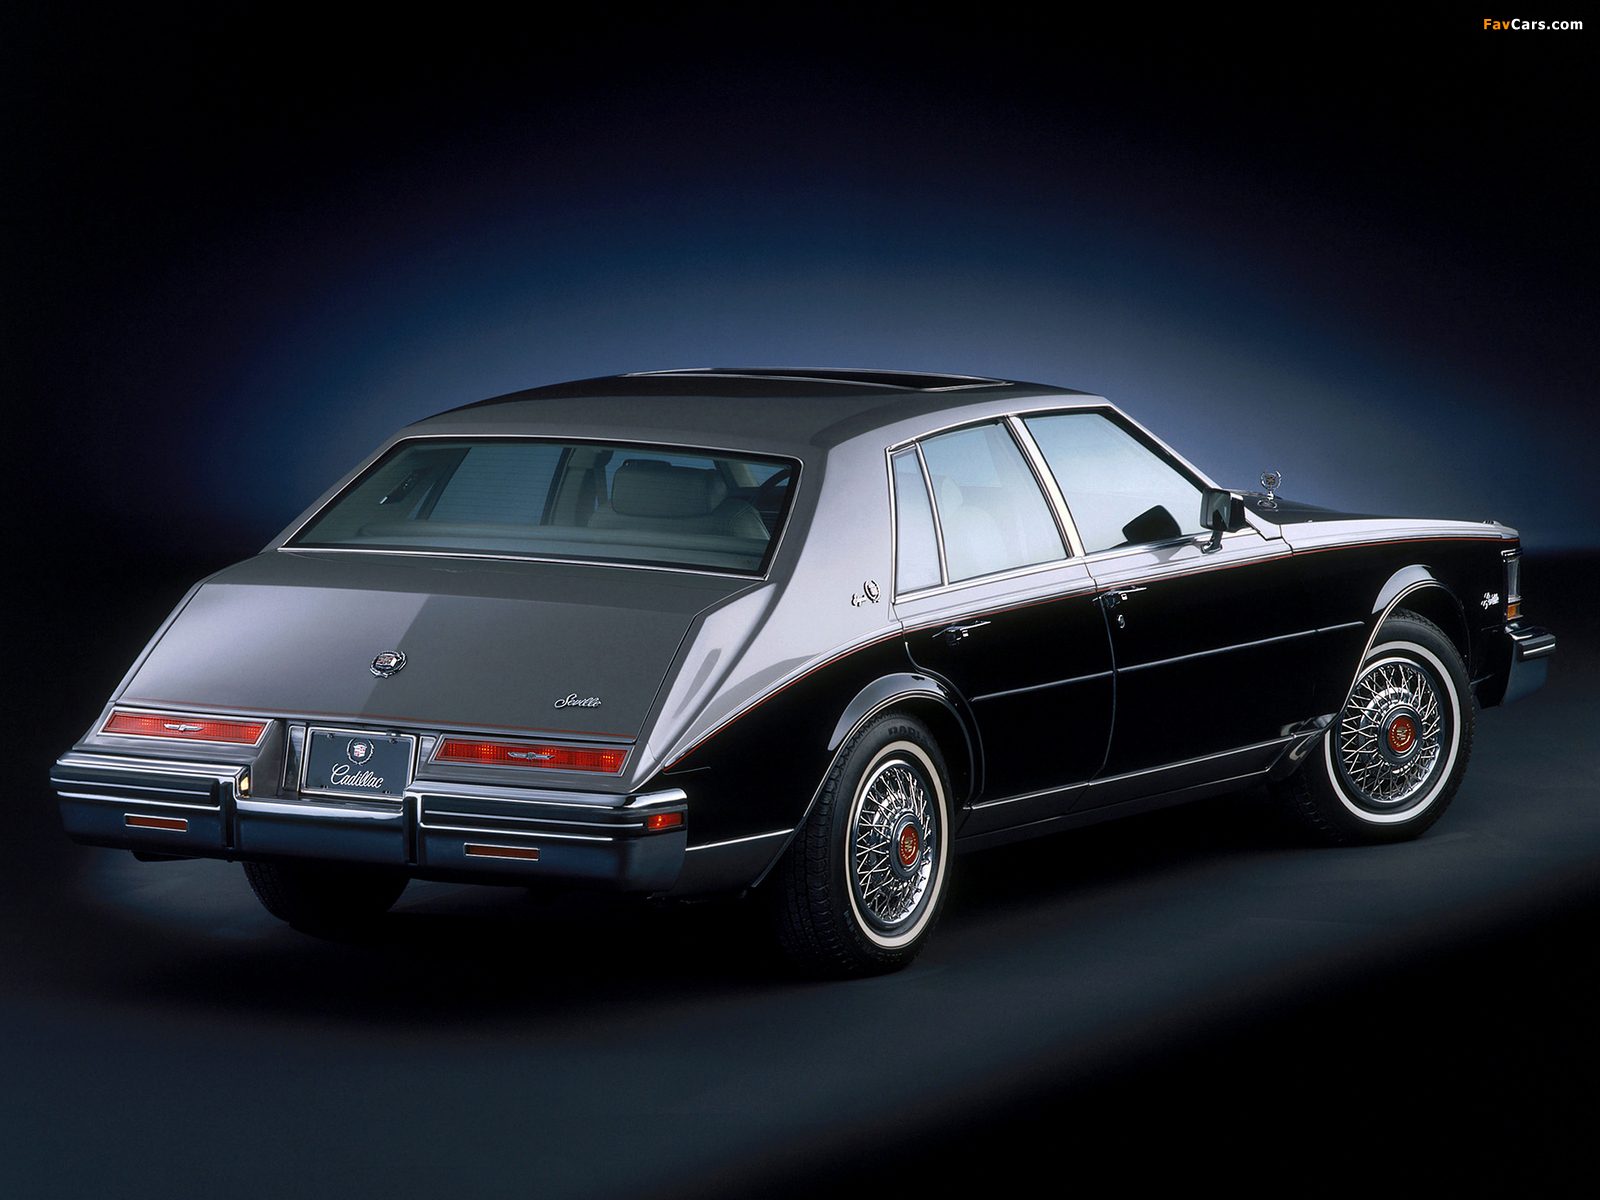 pictures_cadillac_seville_1980_3_1600x1200.jpg